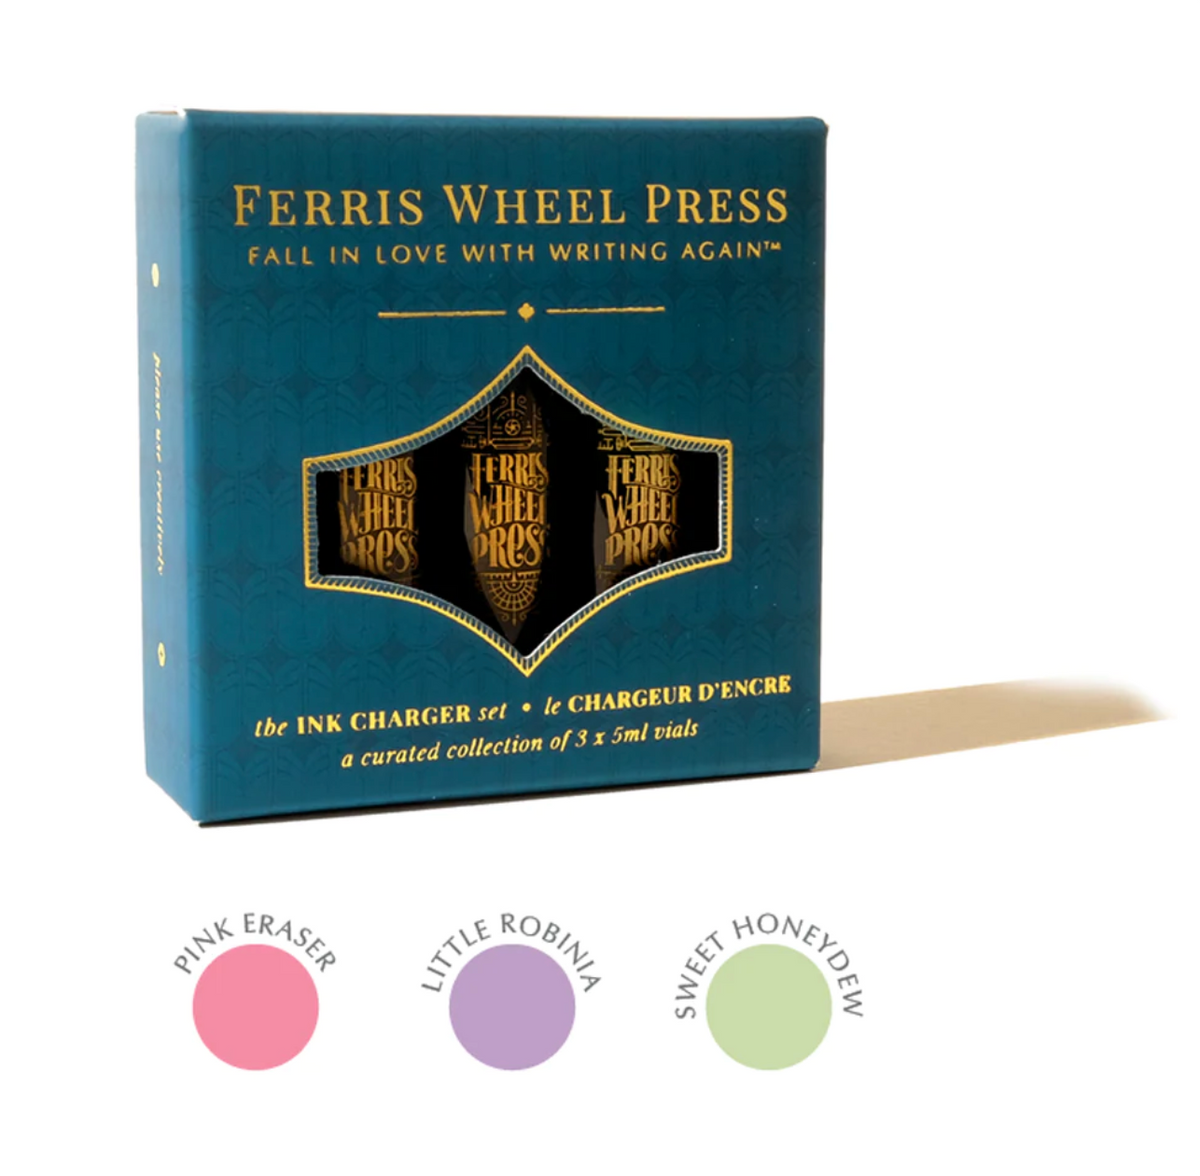 Ferris Wheel Press Ink Charger Set. Available in Singapore at Drawing Etc. Art Supplies.